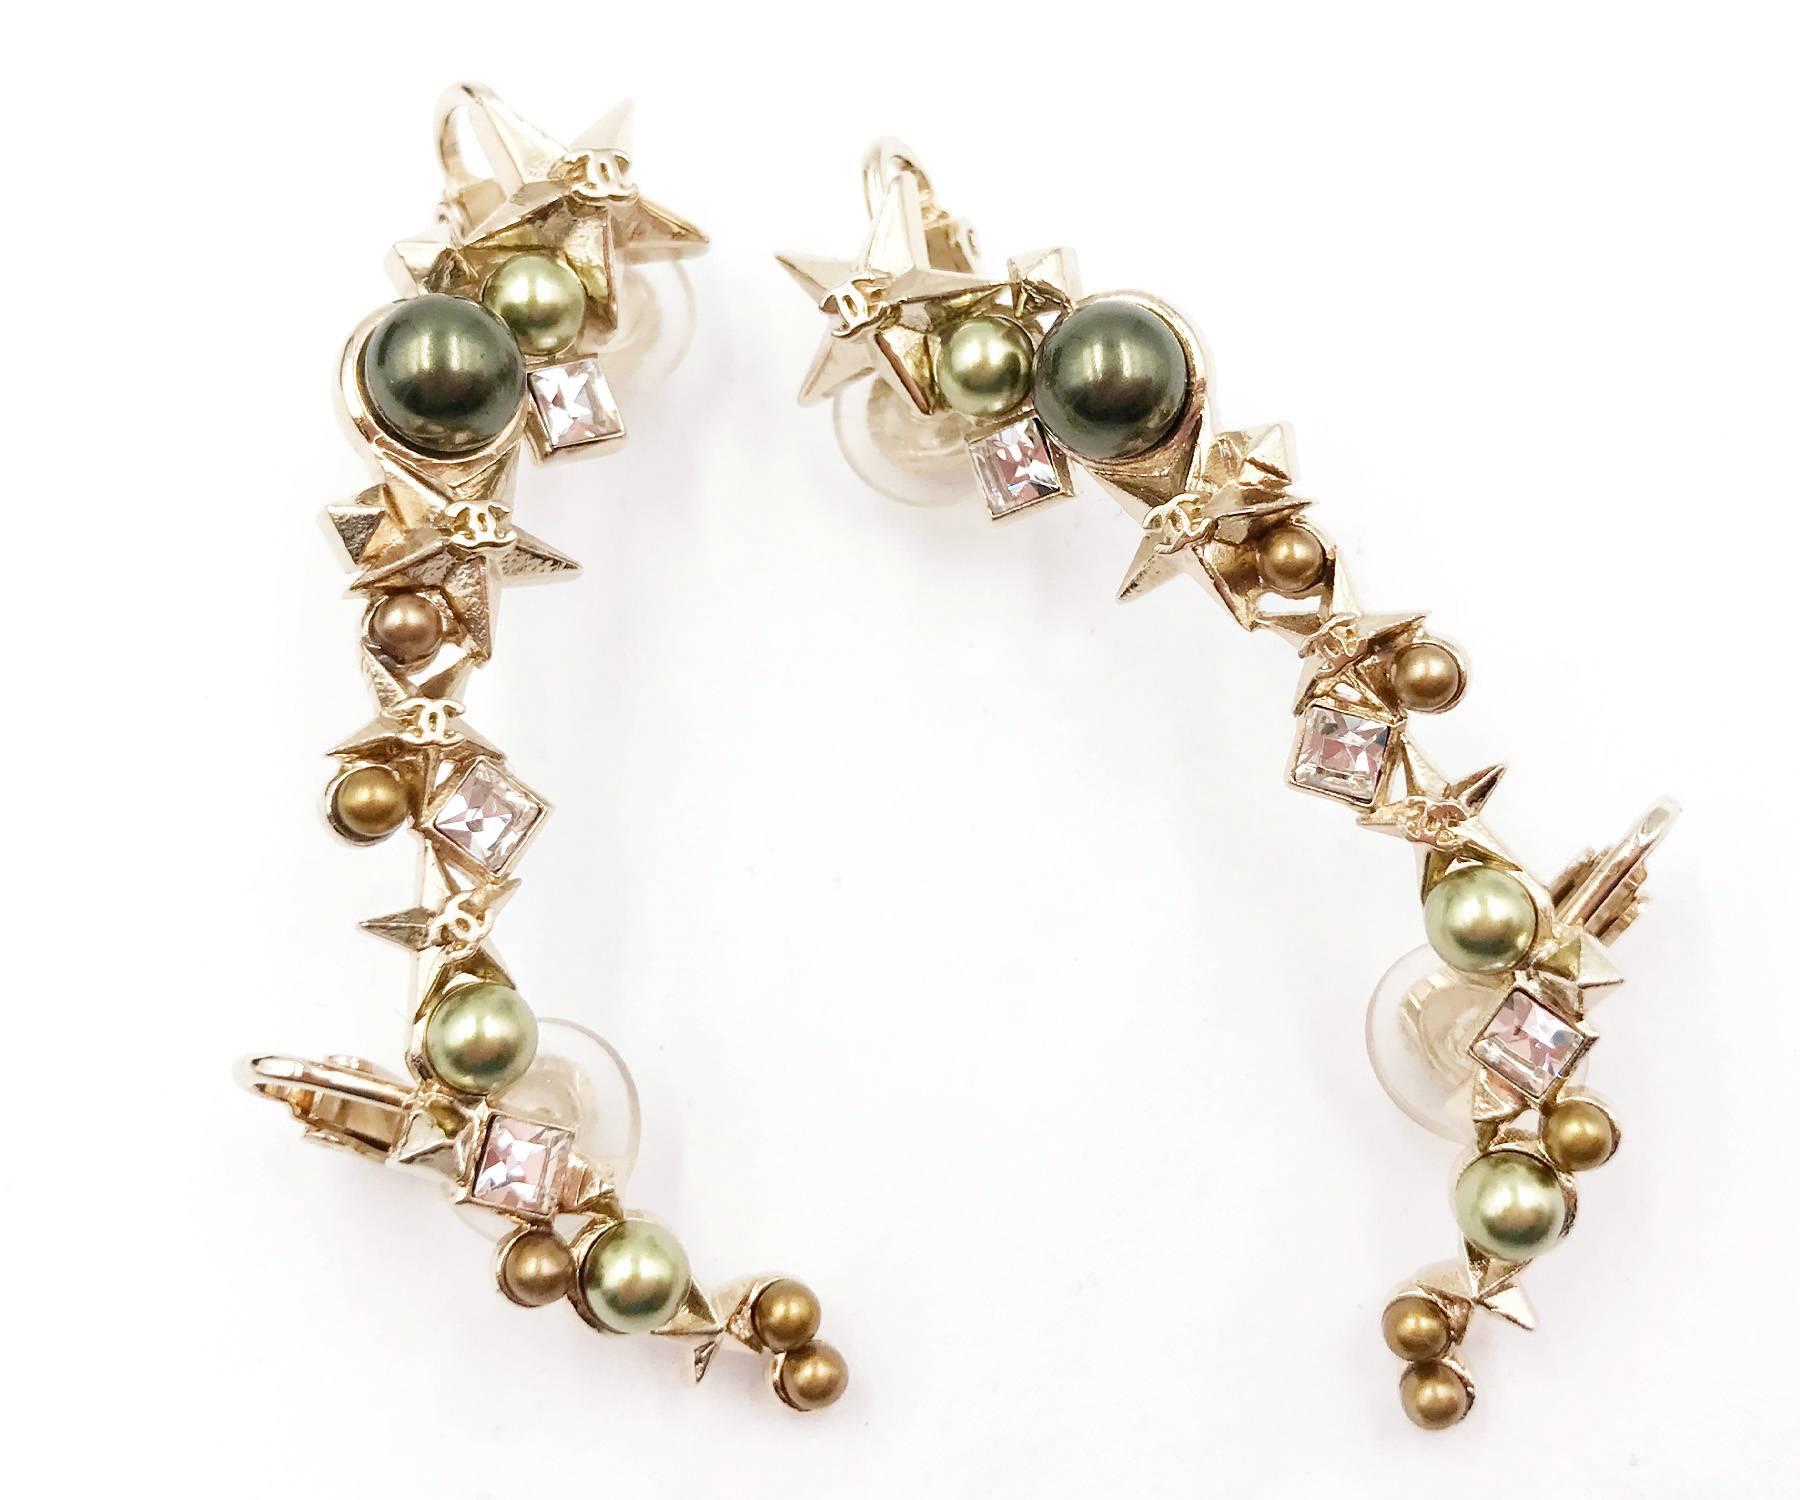 Chanel 17 Gold Star Olive Faux Pearl Ear Cuff Earrings

*Marked 2017
*Made in France
*Comes with original pouch

-Approximately 2.25″
-Wear 1 cuff or 2
-Or send one of them as a gift to your best friend!

3167-17190